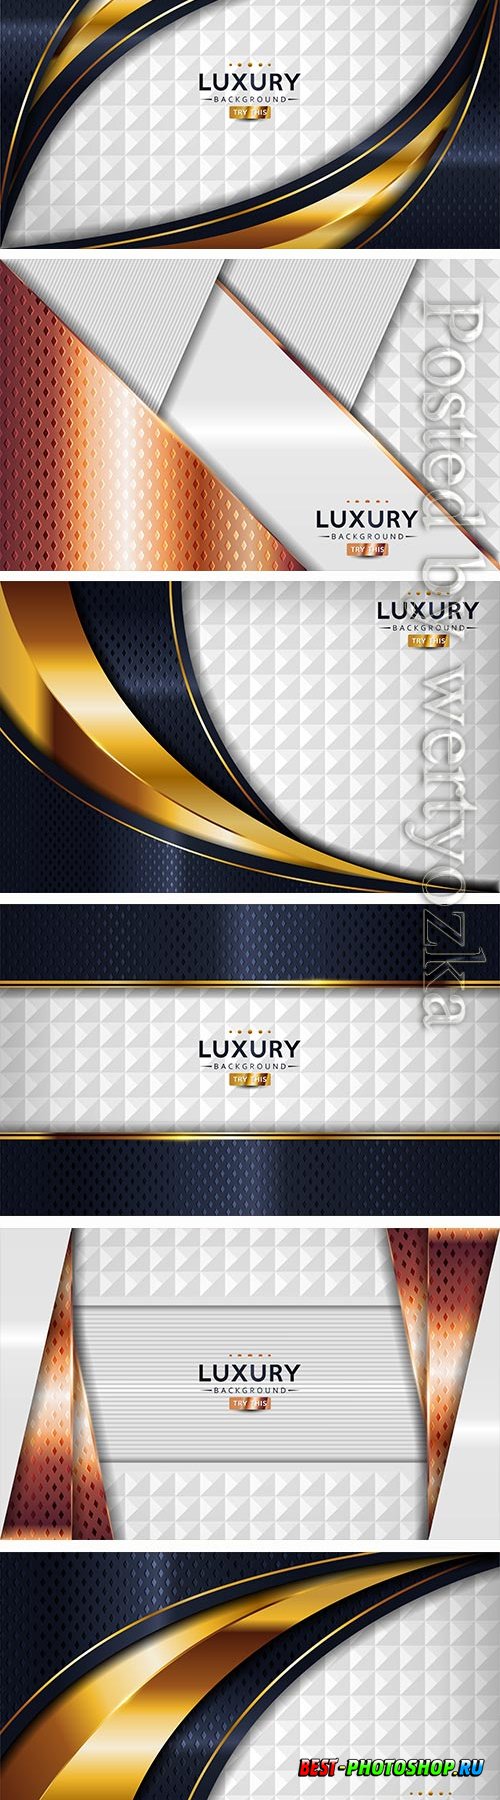 Dark navy and textured white luxury abstract vector background